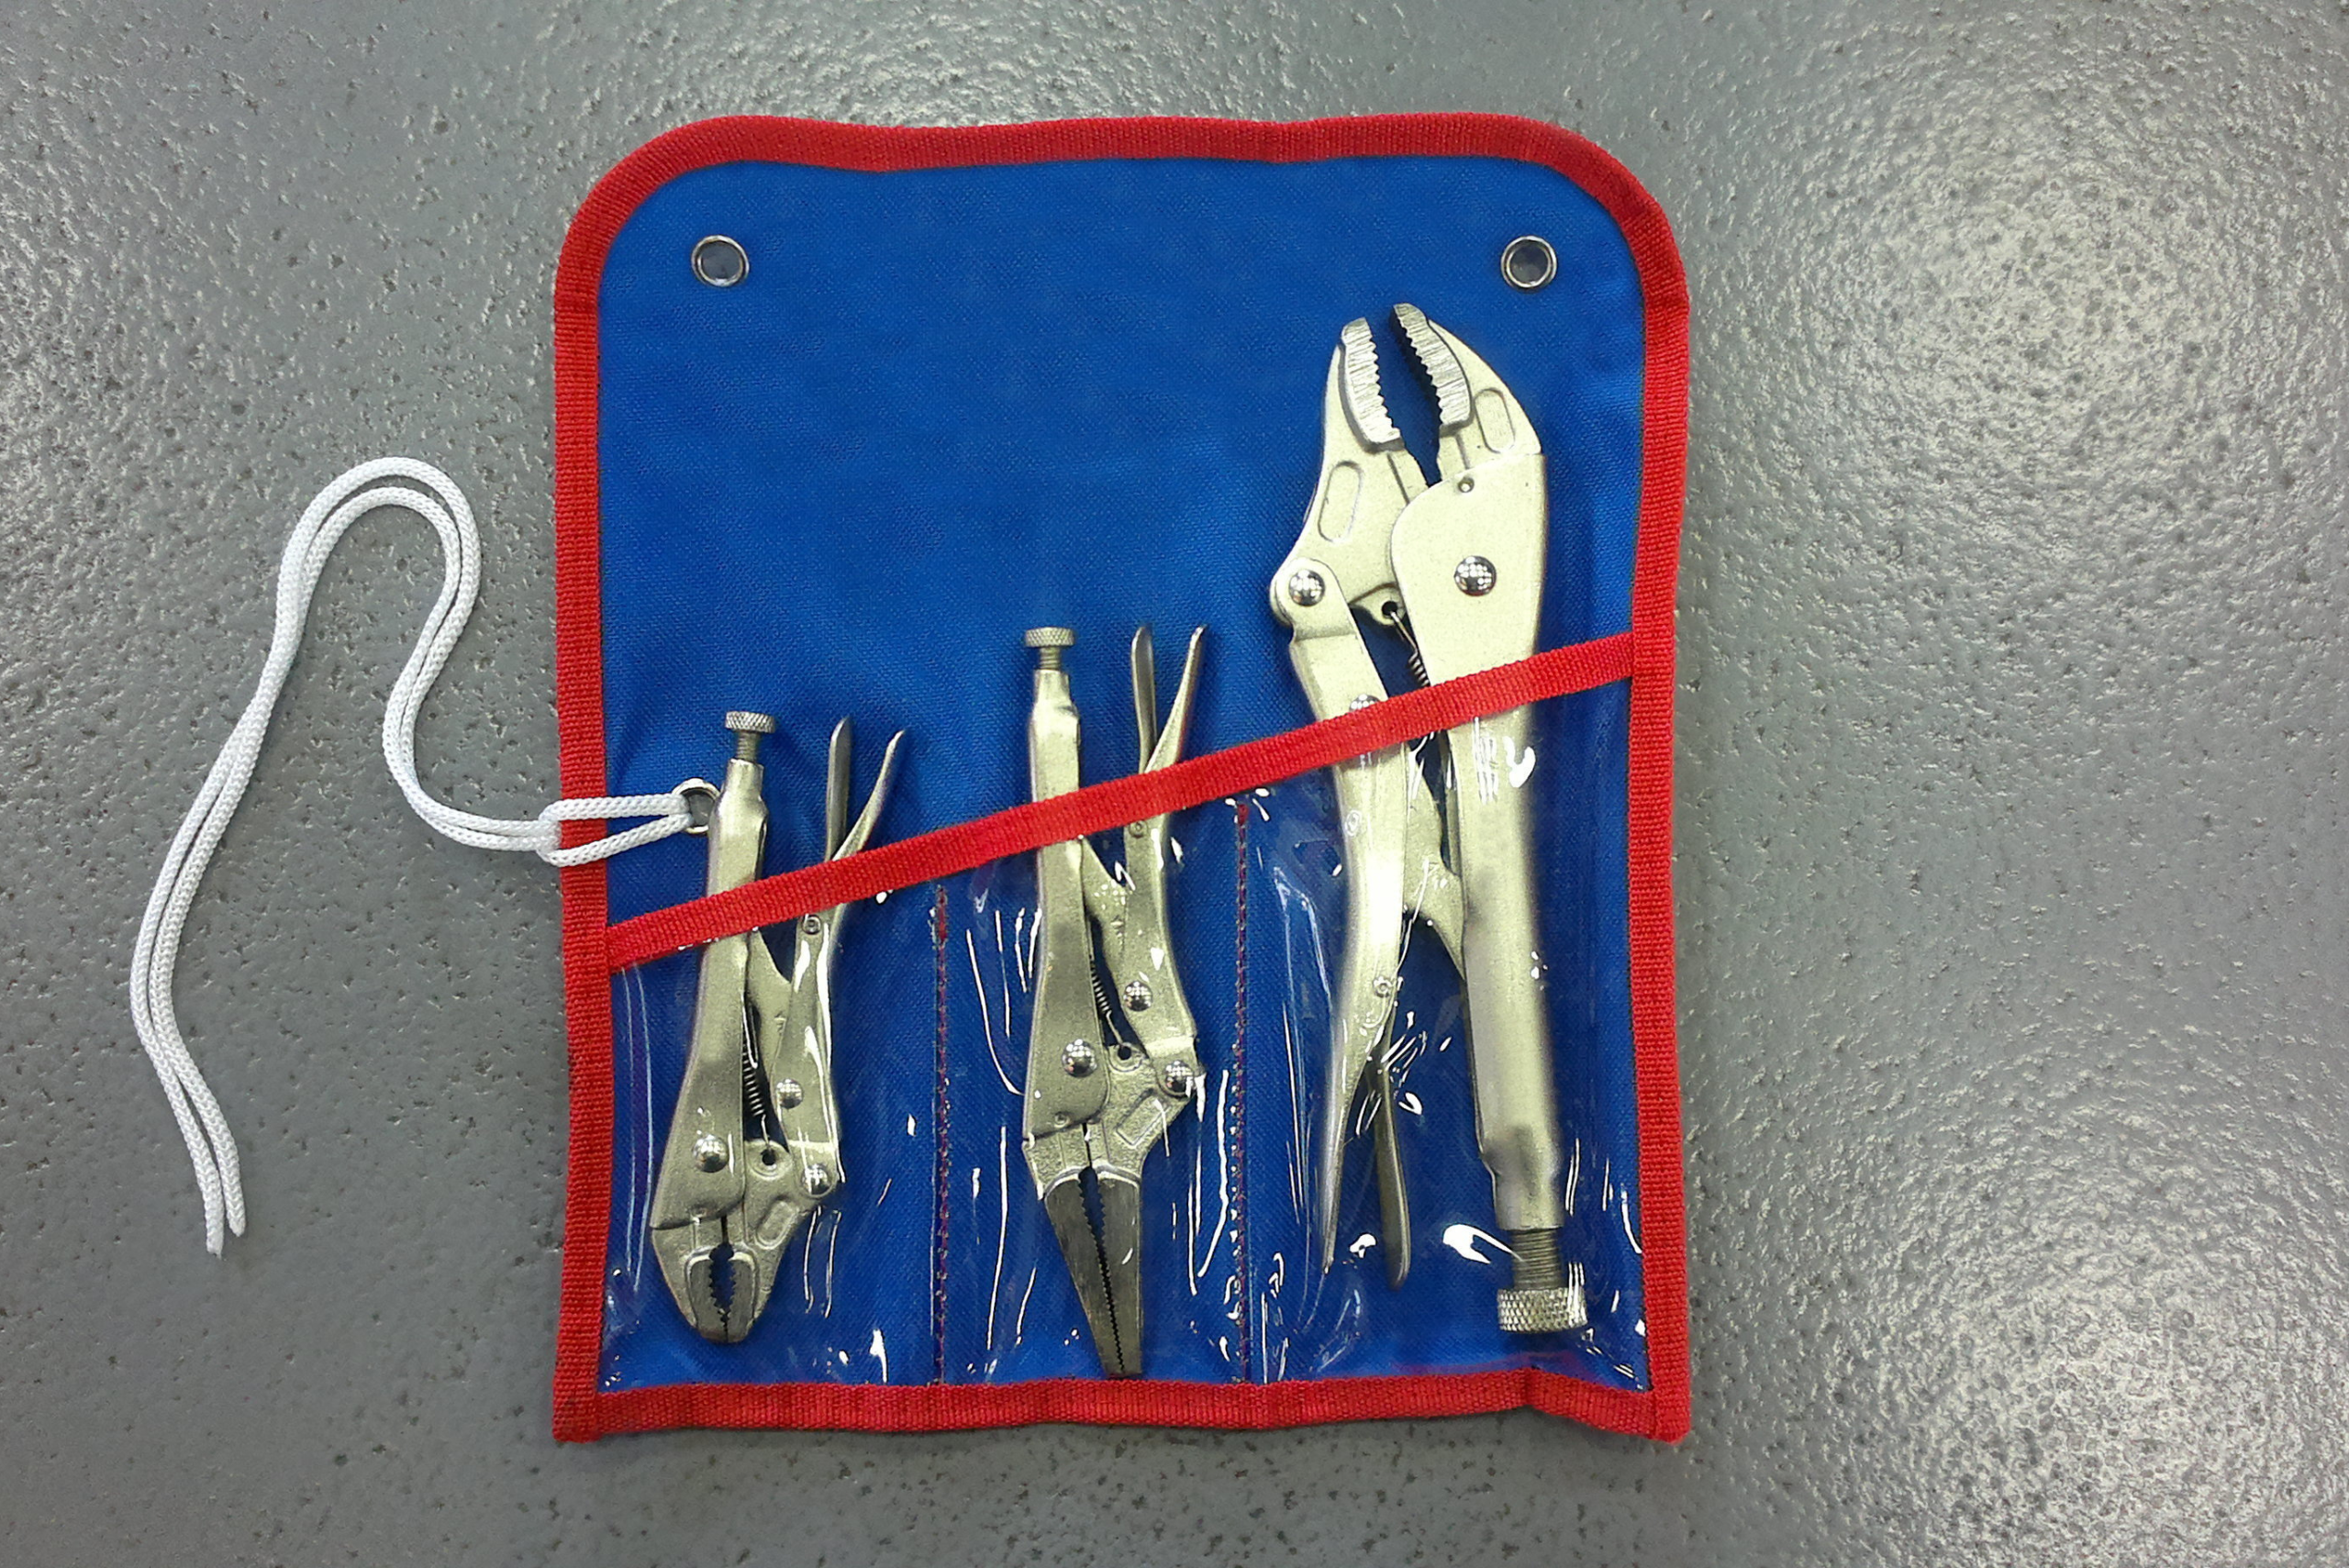 A pack of three locking pliers.